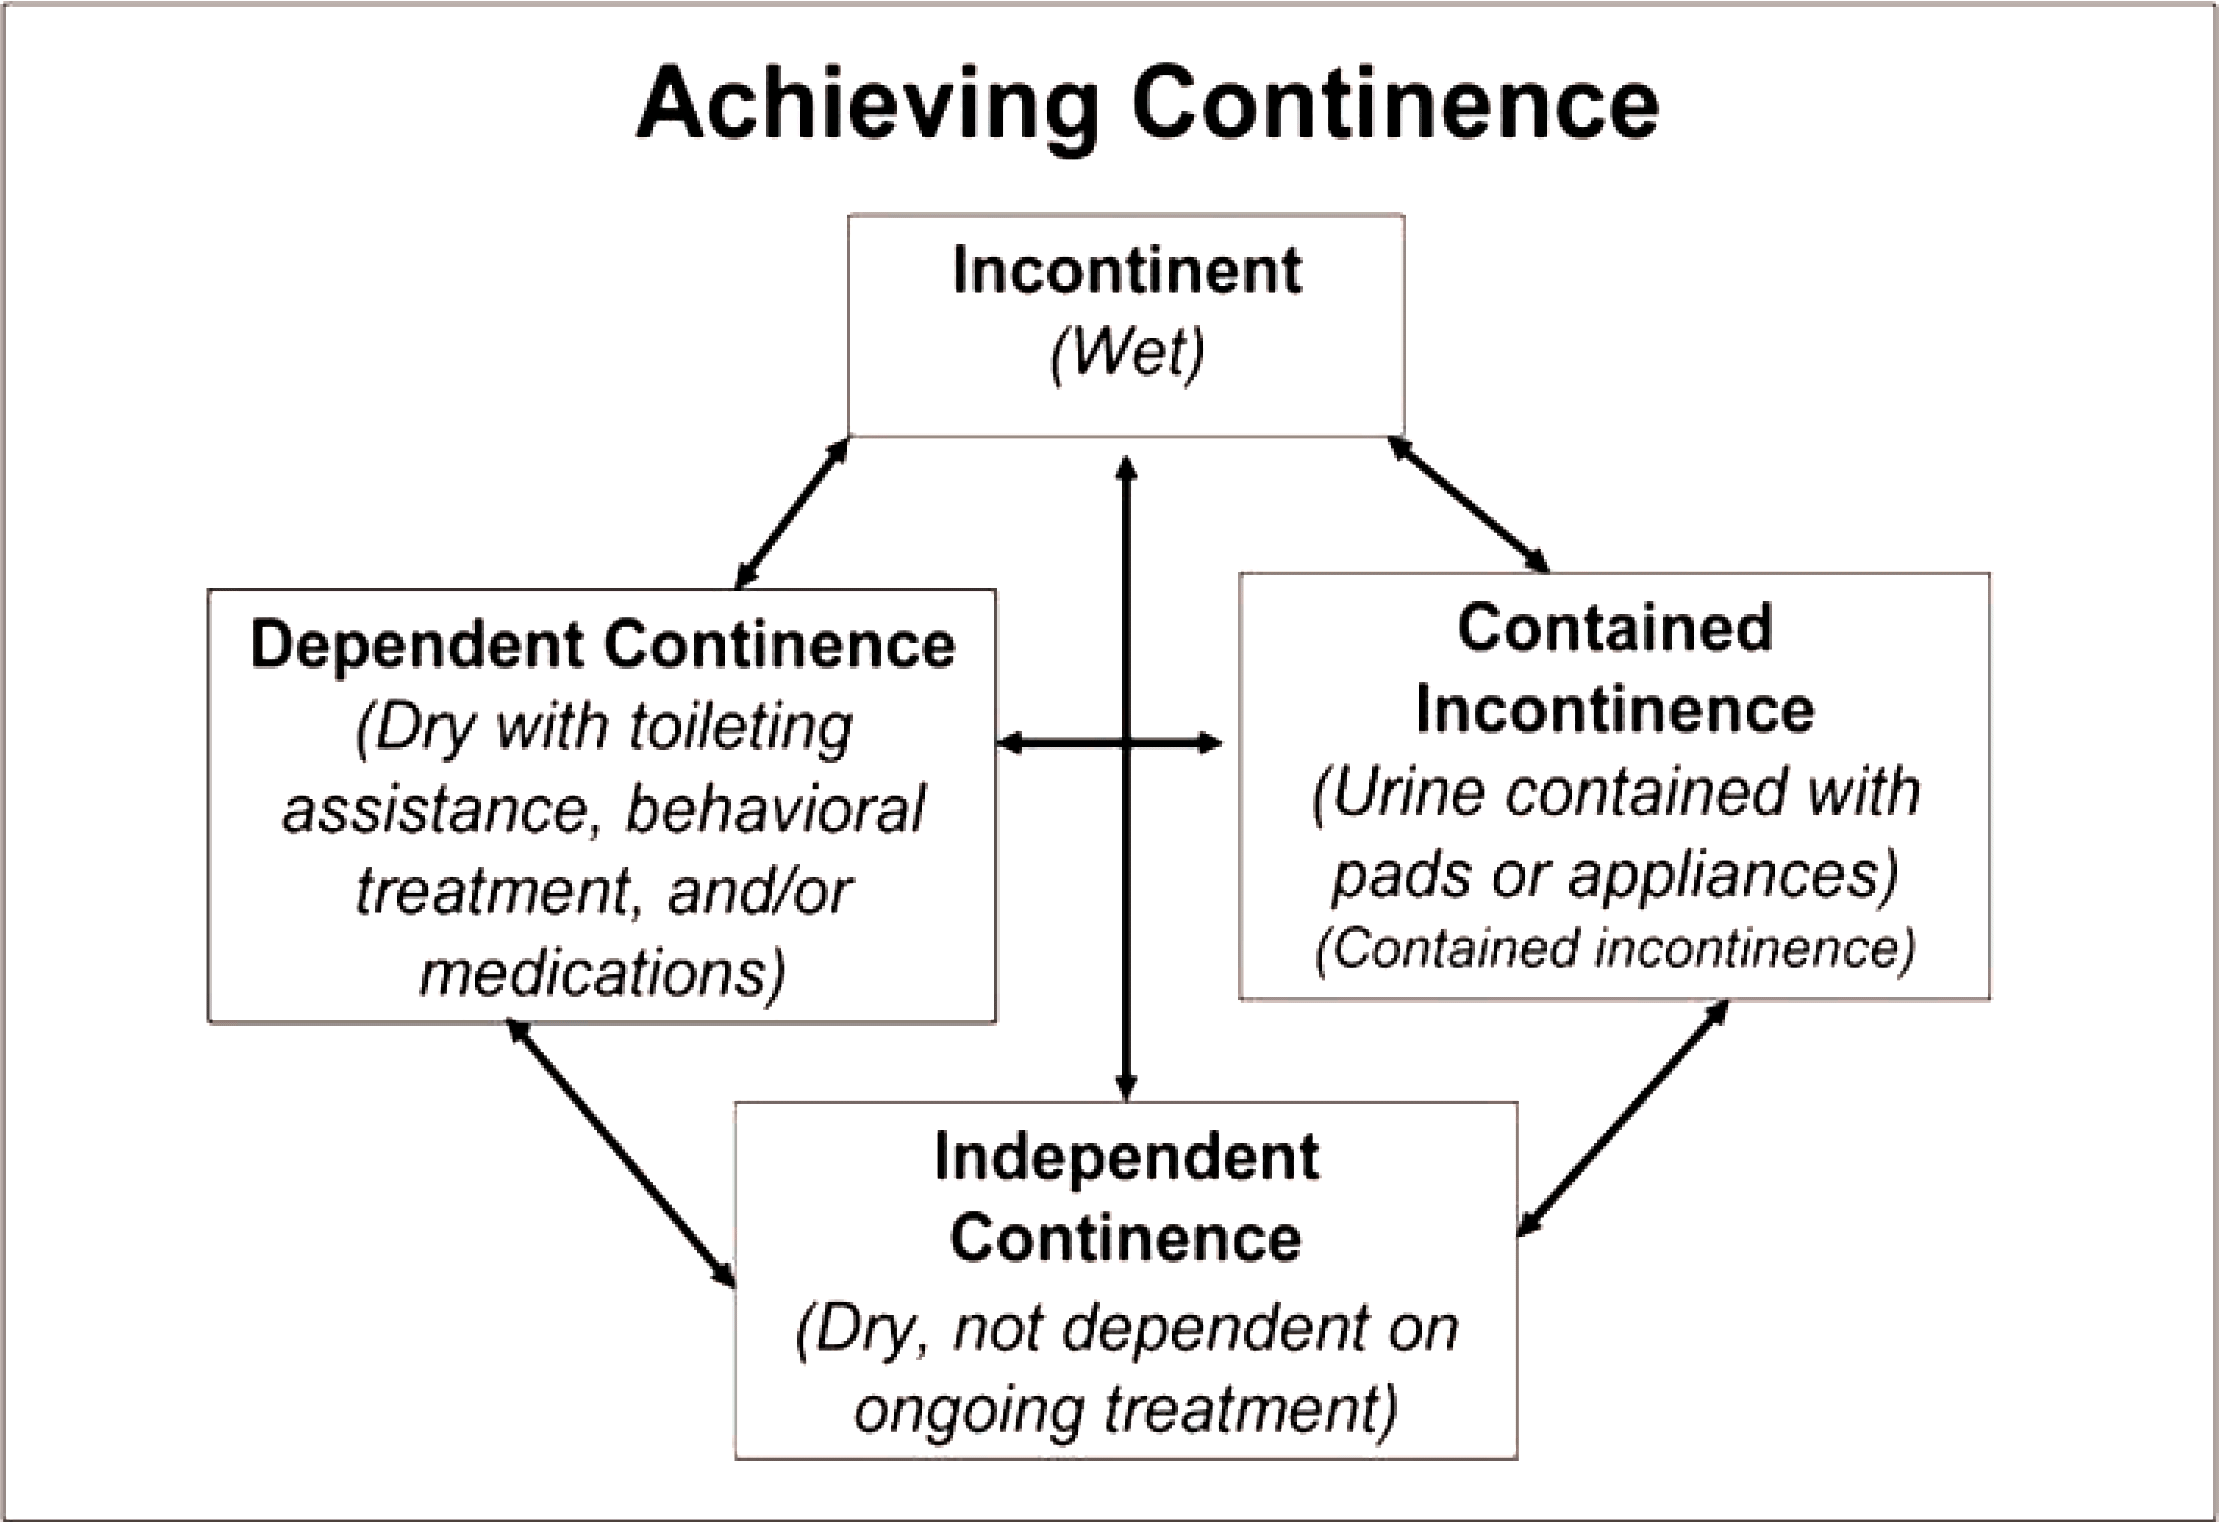 Figure 1. Achieving continence